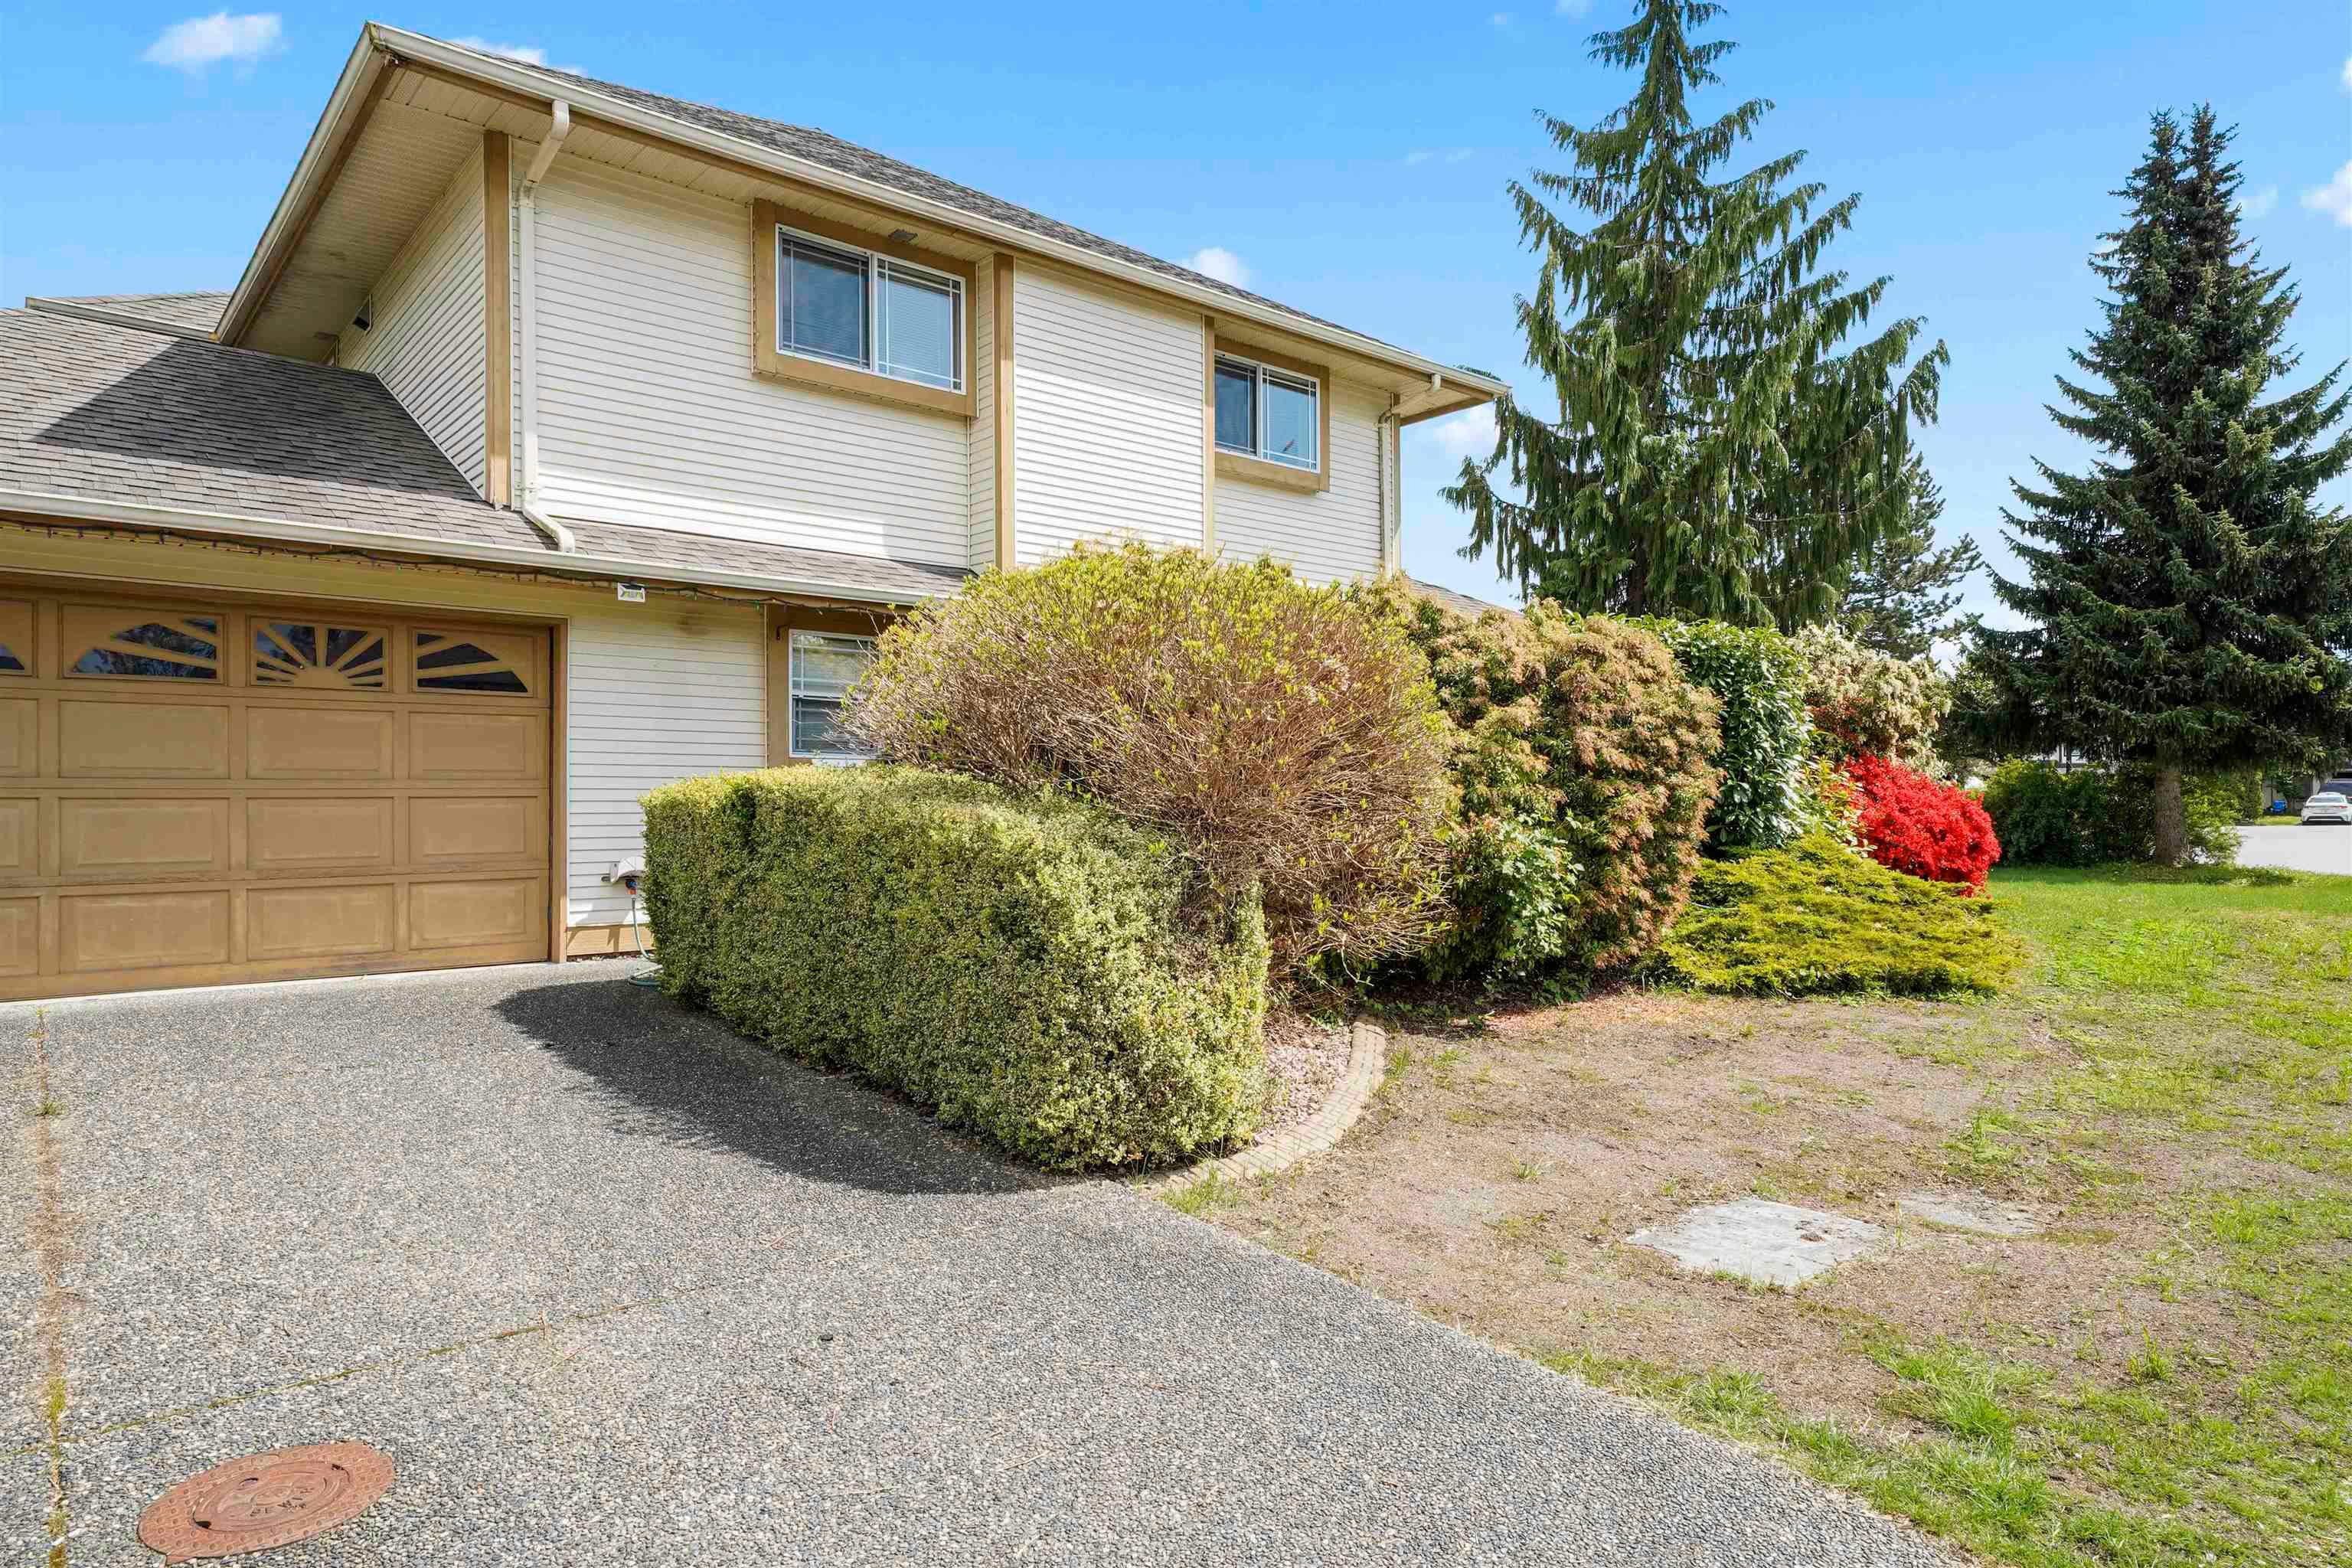 I have sold a property at 12080 204B ST in Maple Ridge
